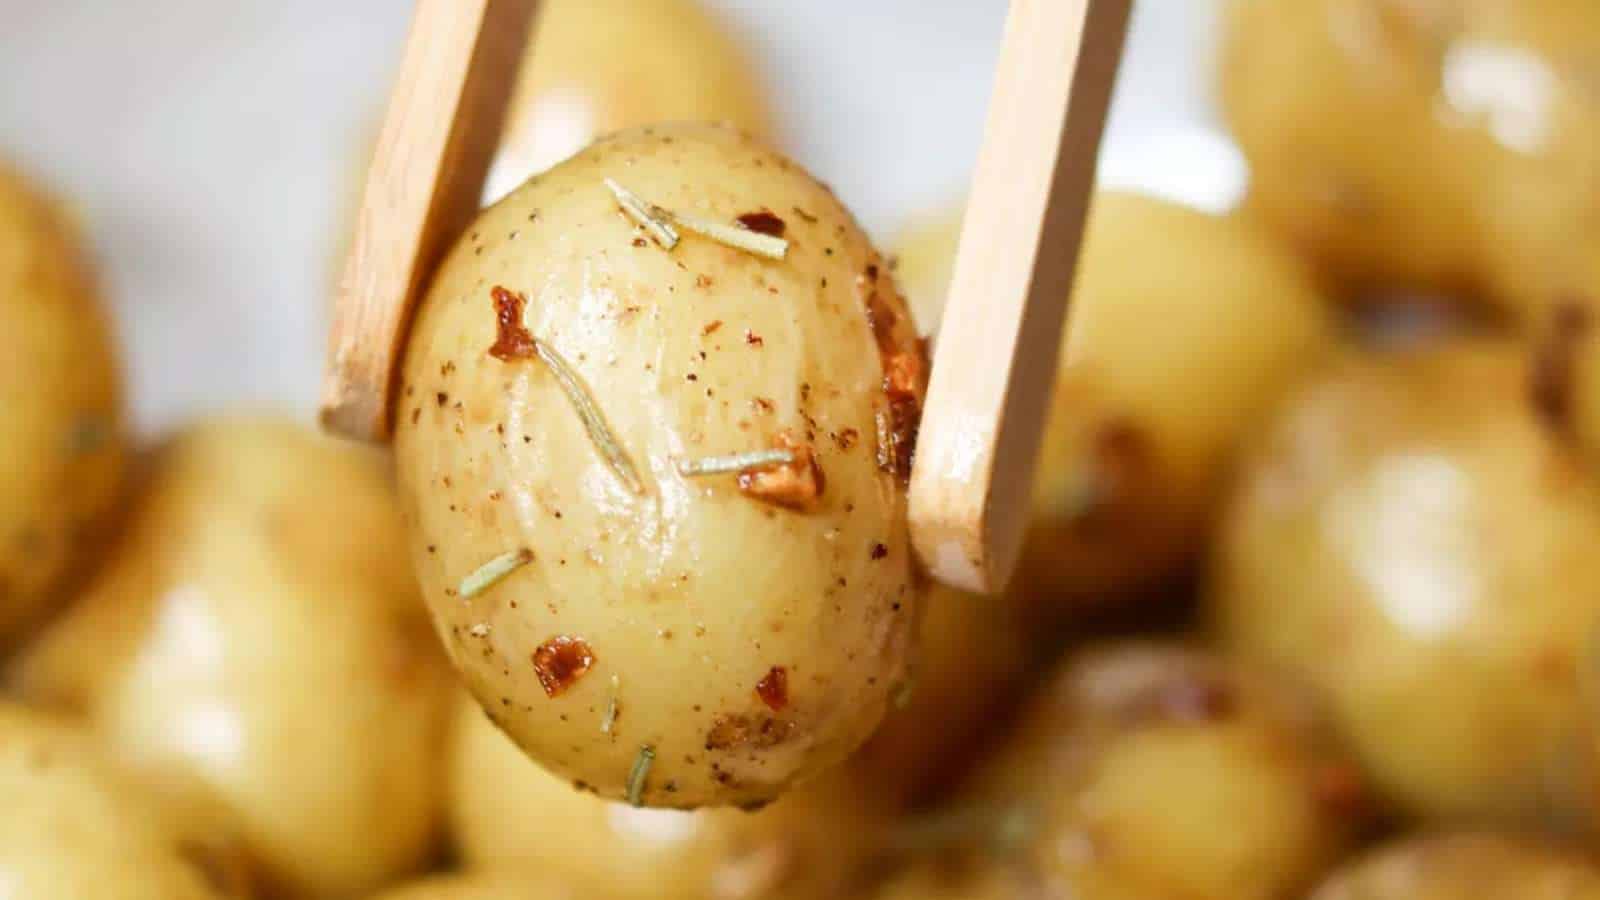 Roasted potatoes with rosemary on a wooden spoon.